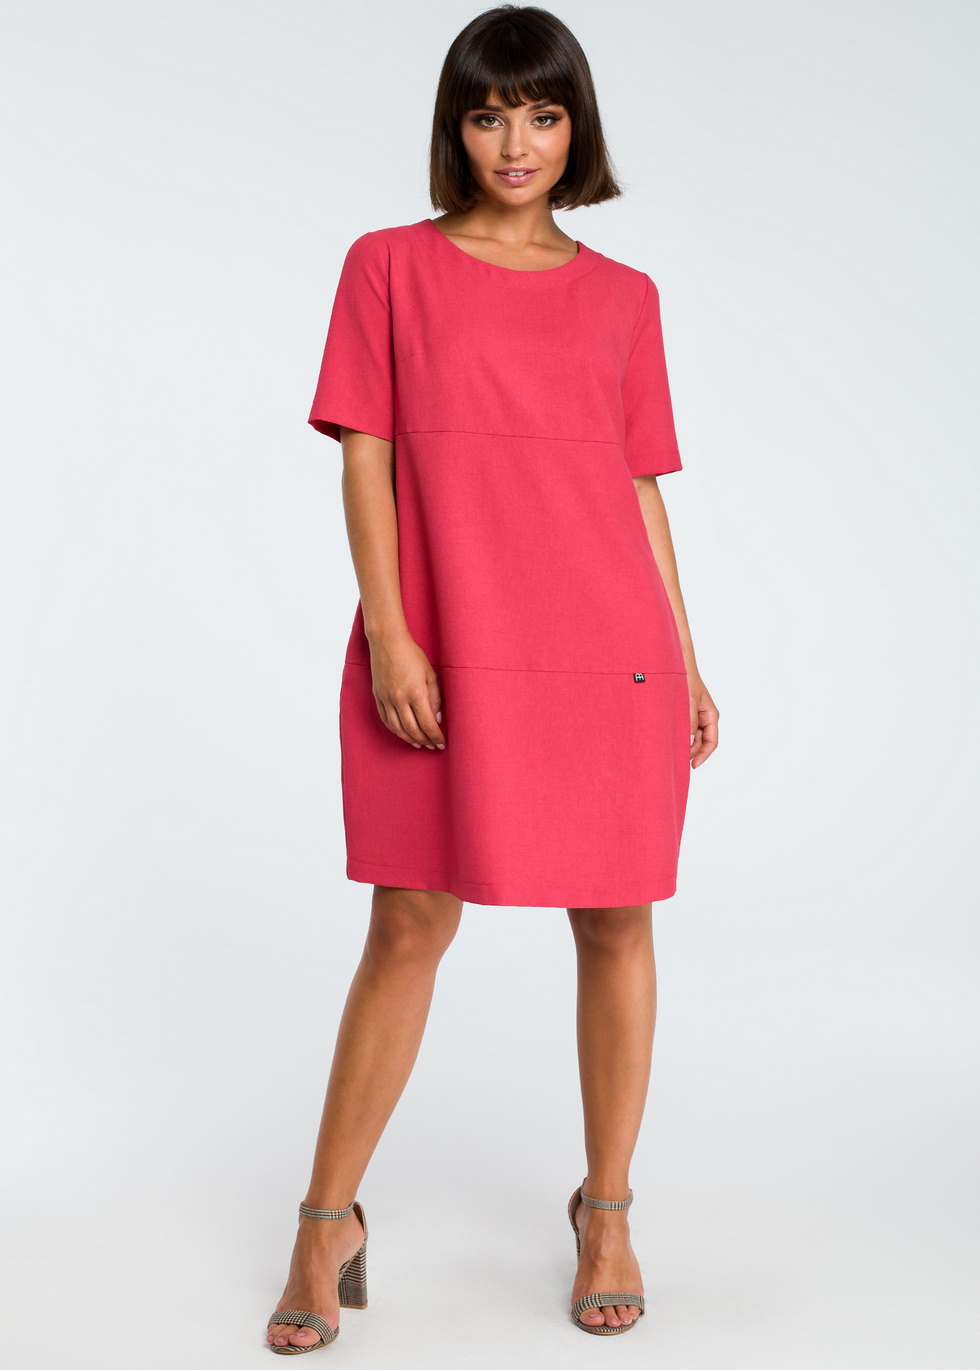 Casual Loose Fitting Dress - Pink